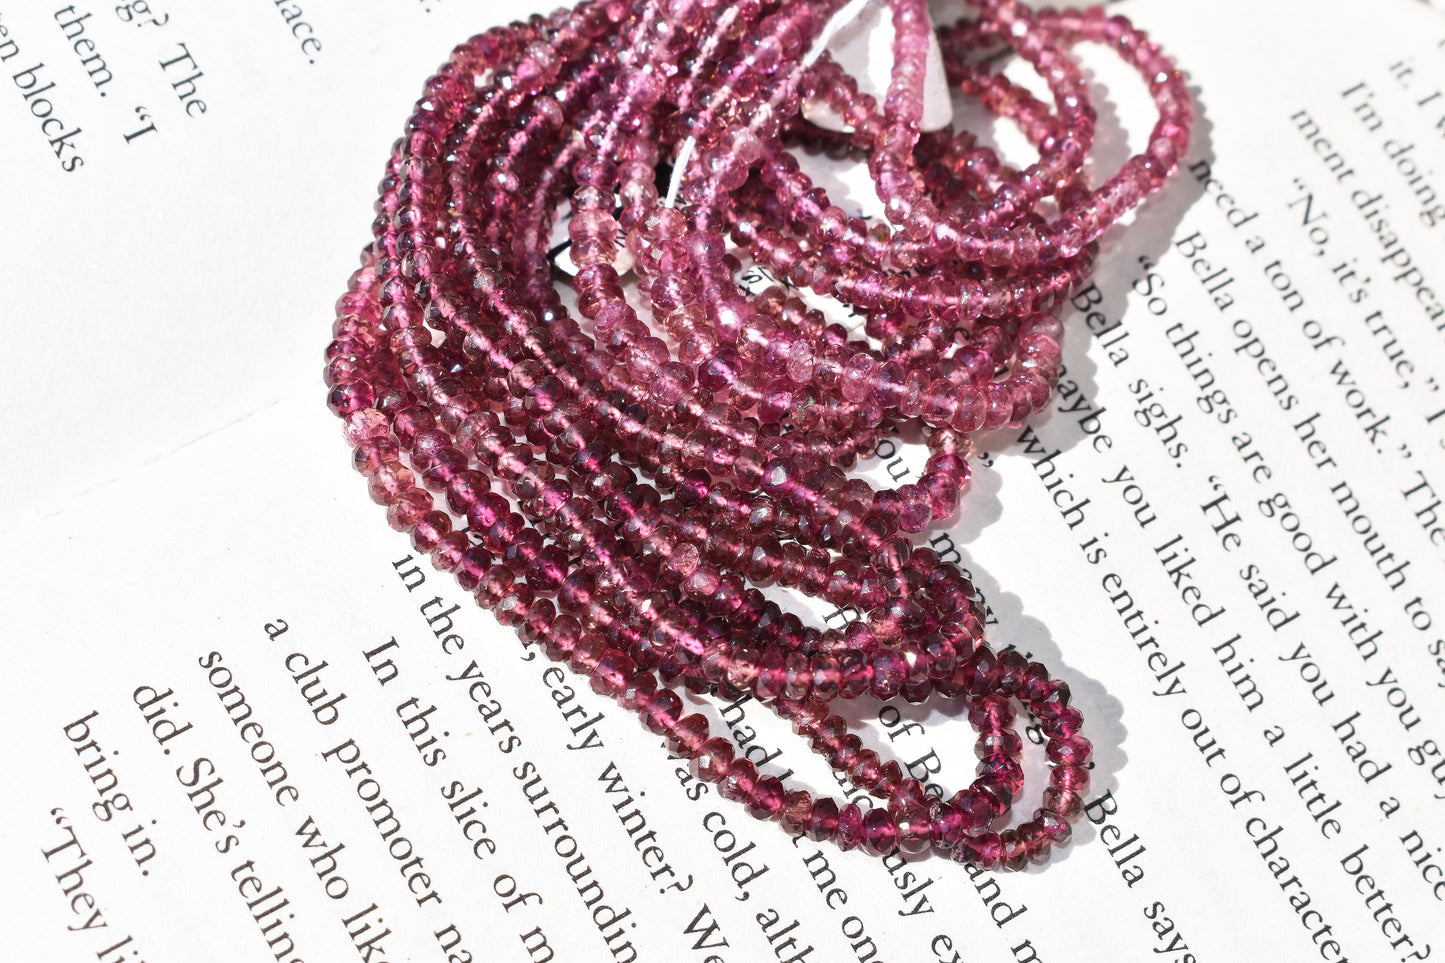 Ombre Pink Tourmaline Rondelle Beads 2.5-3mm x 1-2mm